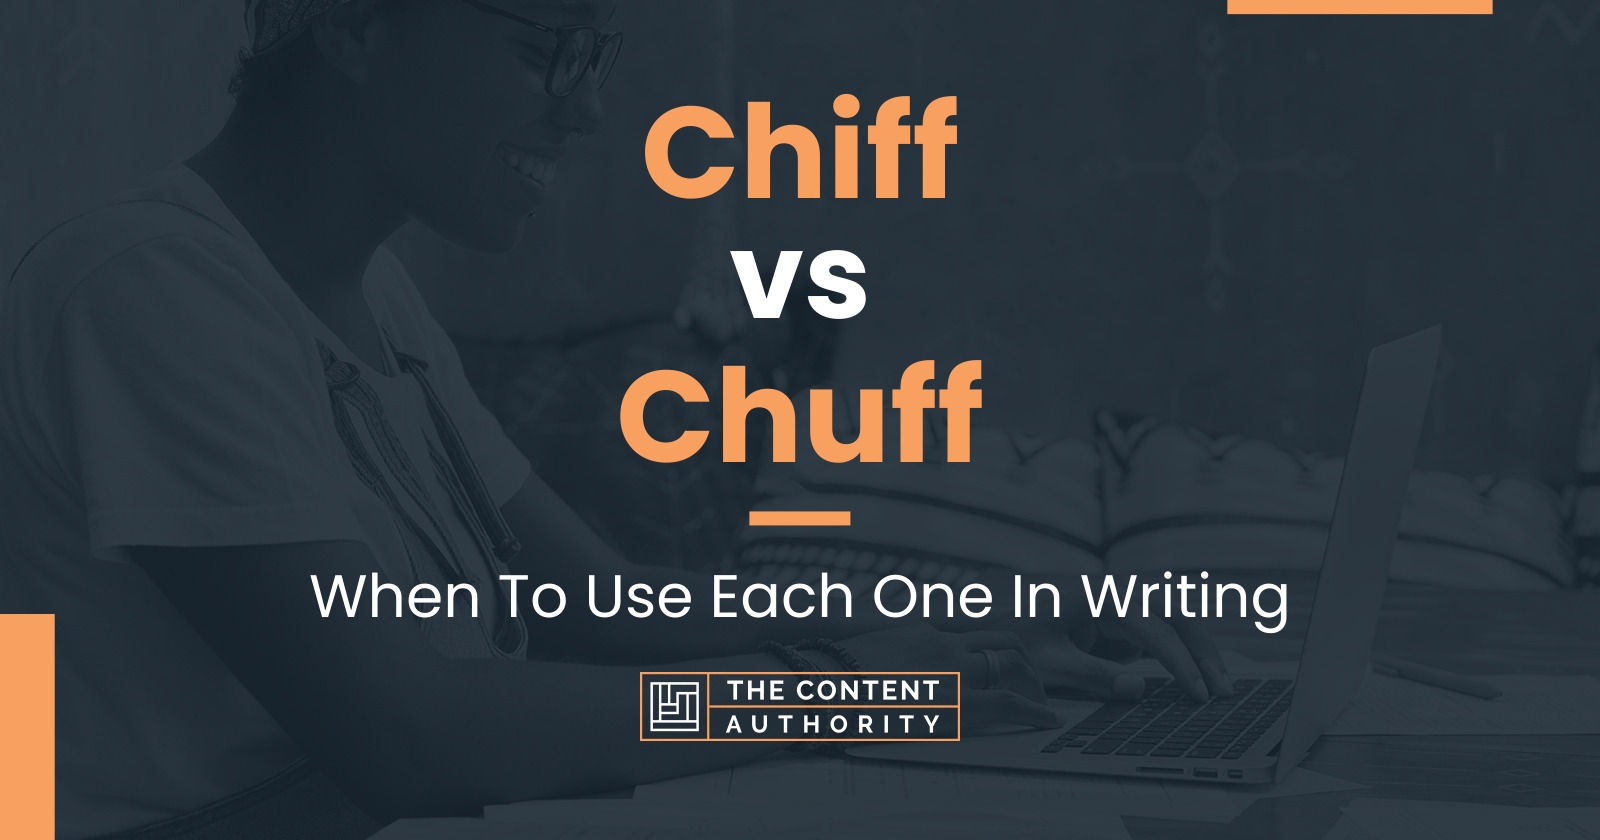 Chiff vs Chuff: When To Use Each One In Writing